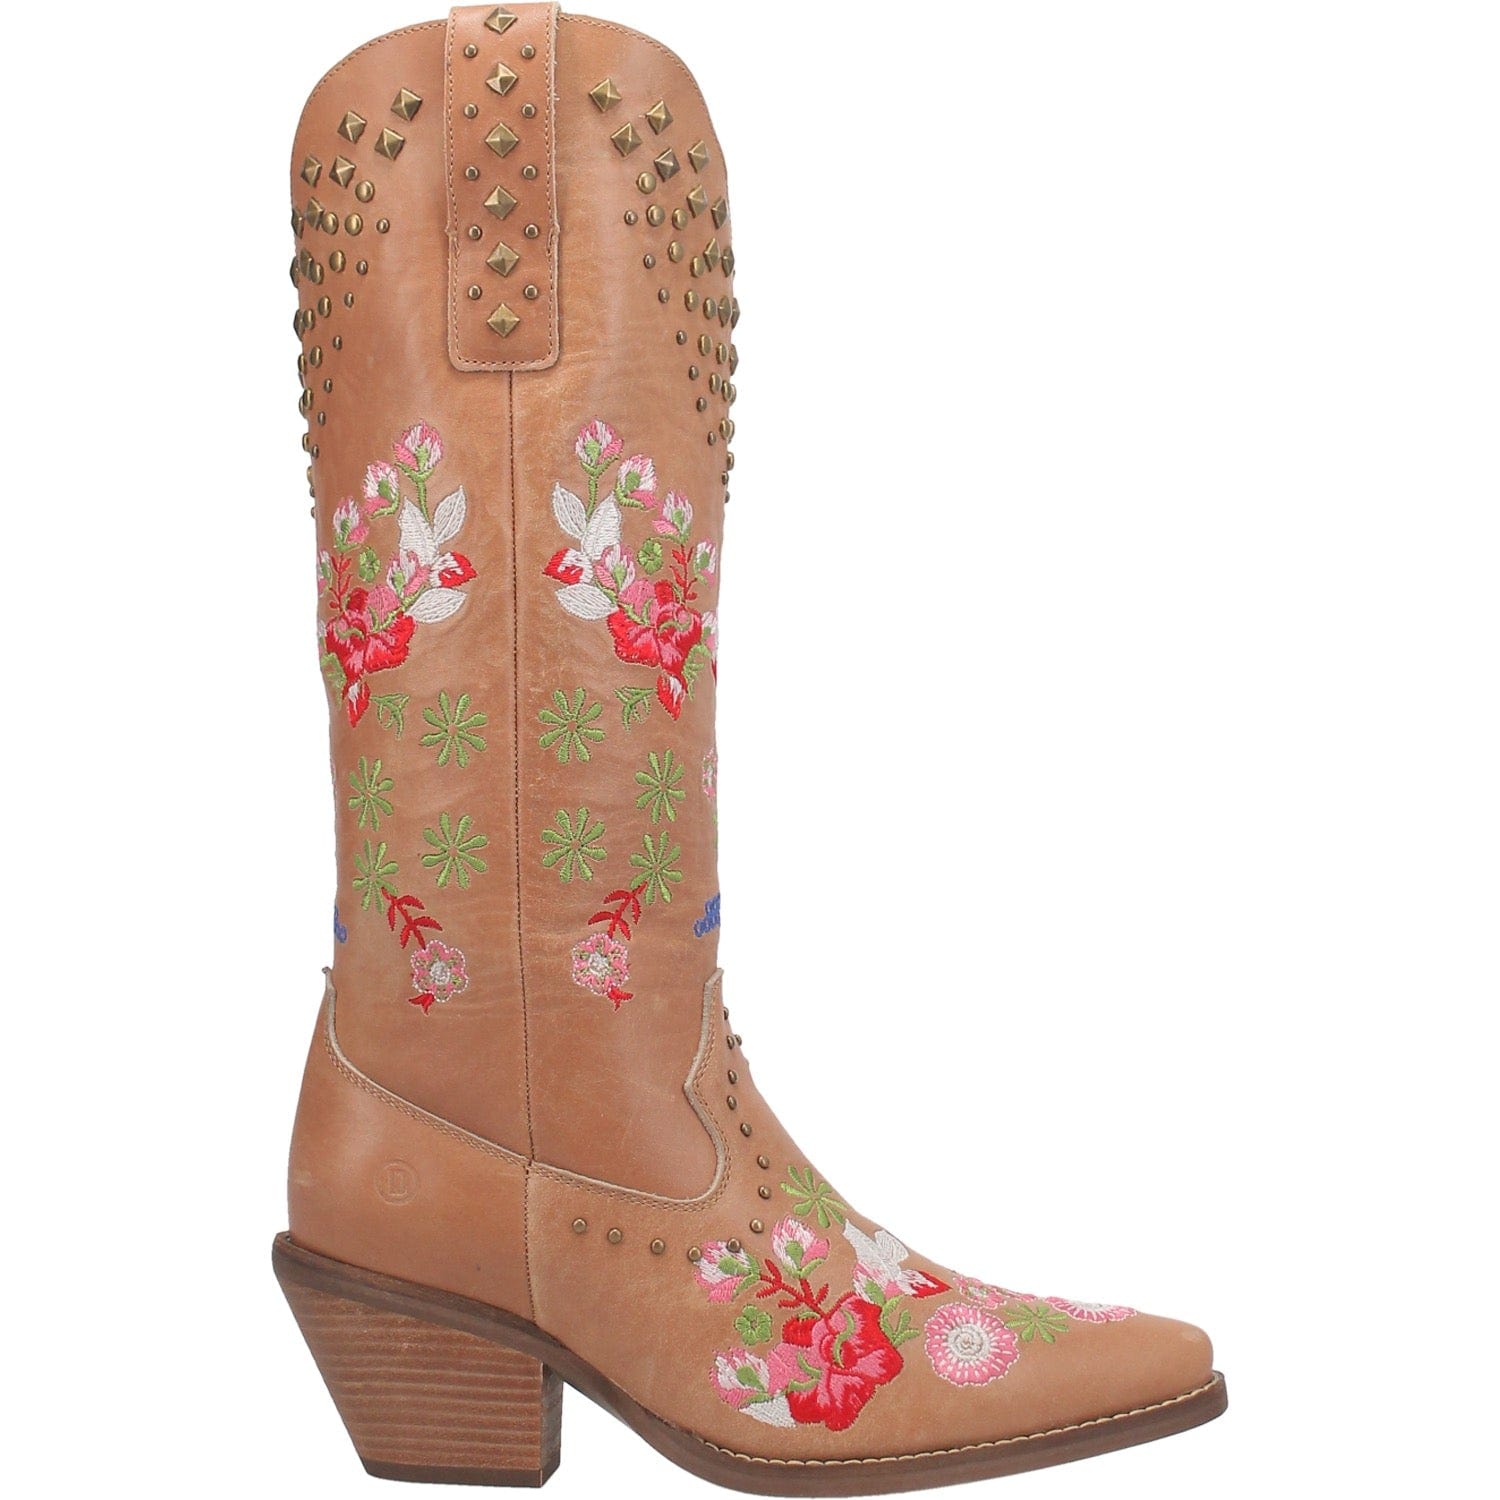 Dingo Women's #Poppy Tan Floral Leather Cowgirl Boots DI 732